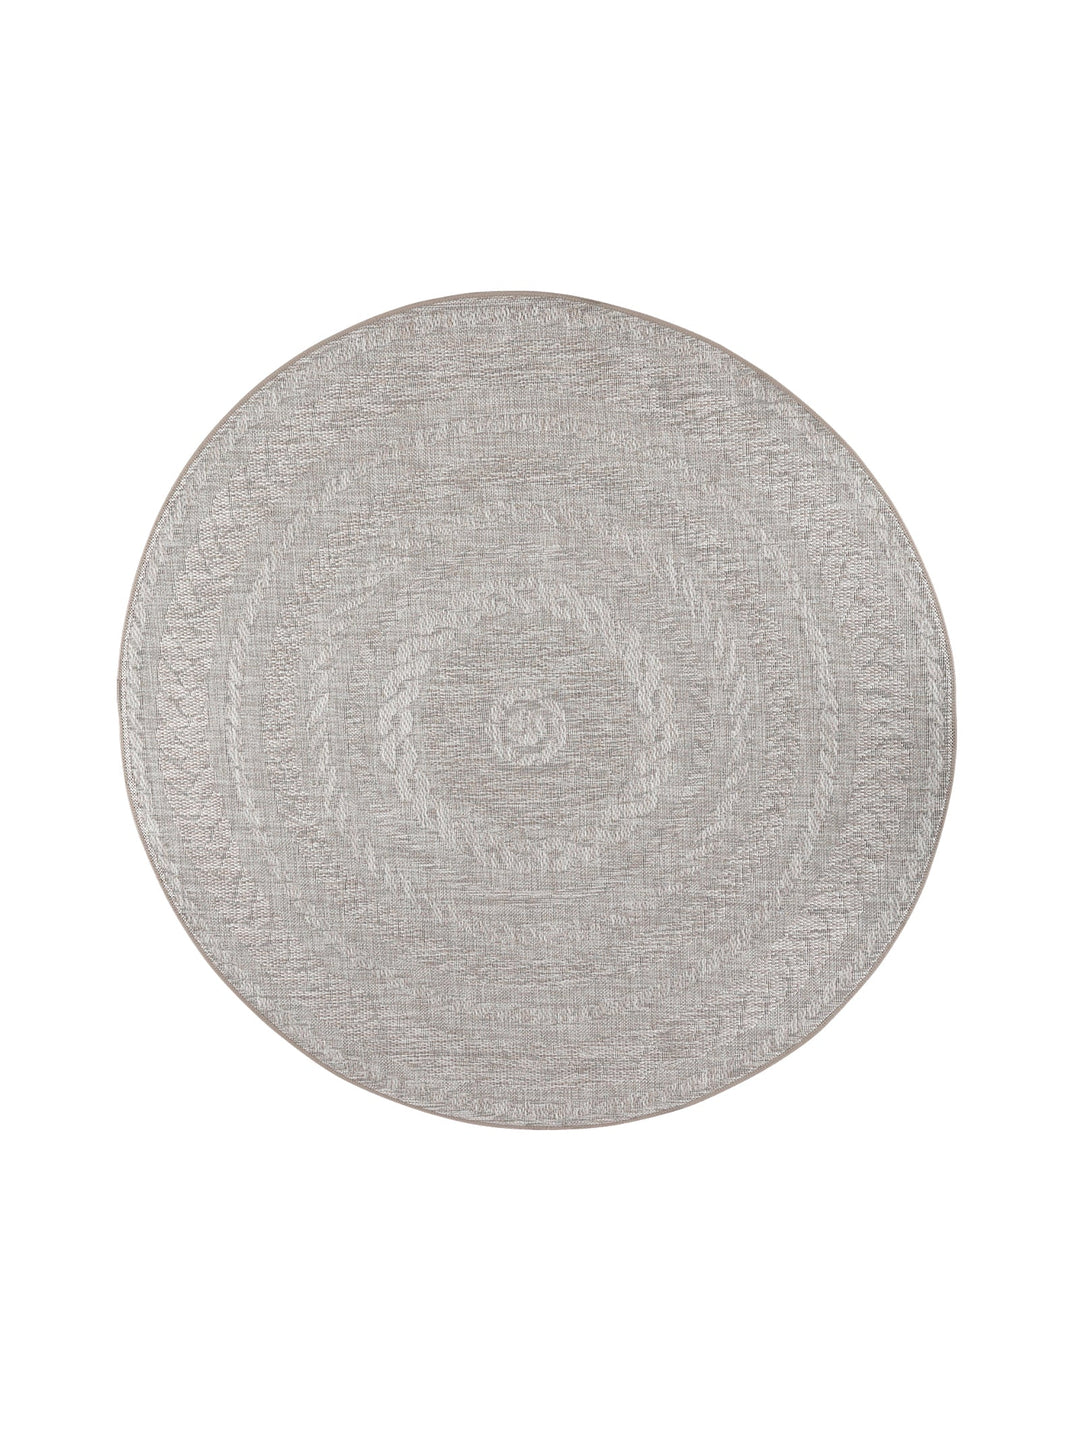 Whirlpool Round Outdoor Rug in Feather - Round Rug- Hertex Haus Online - badge_fully_outdoor